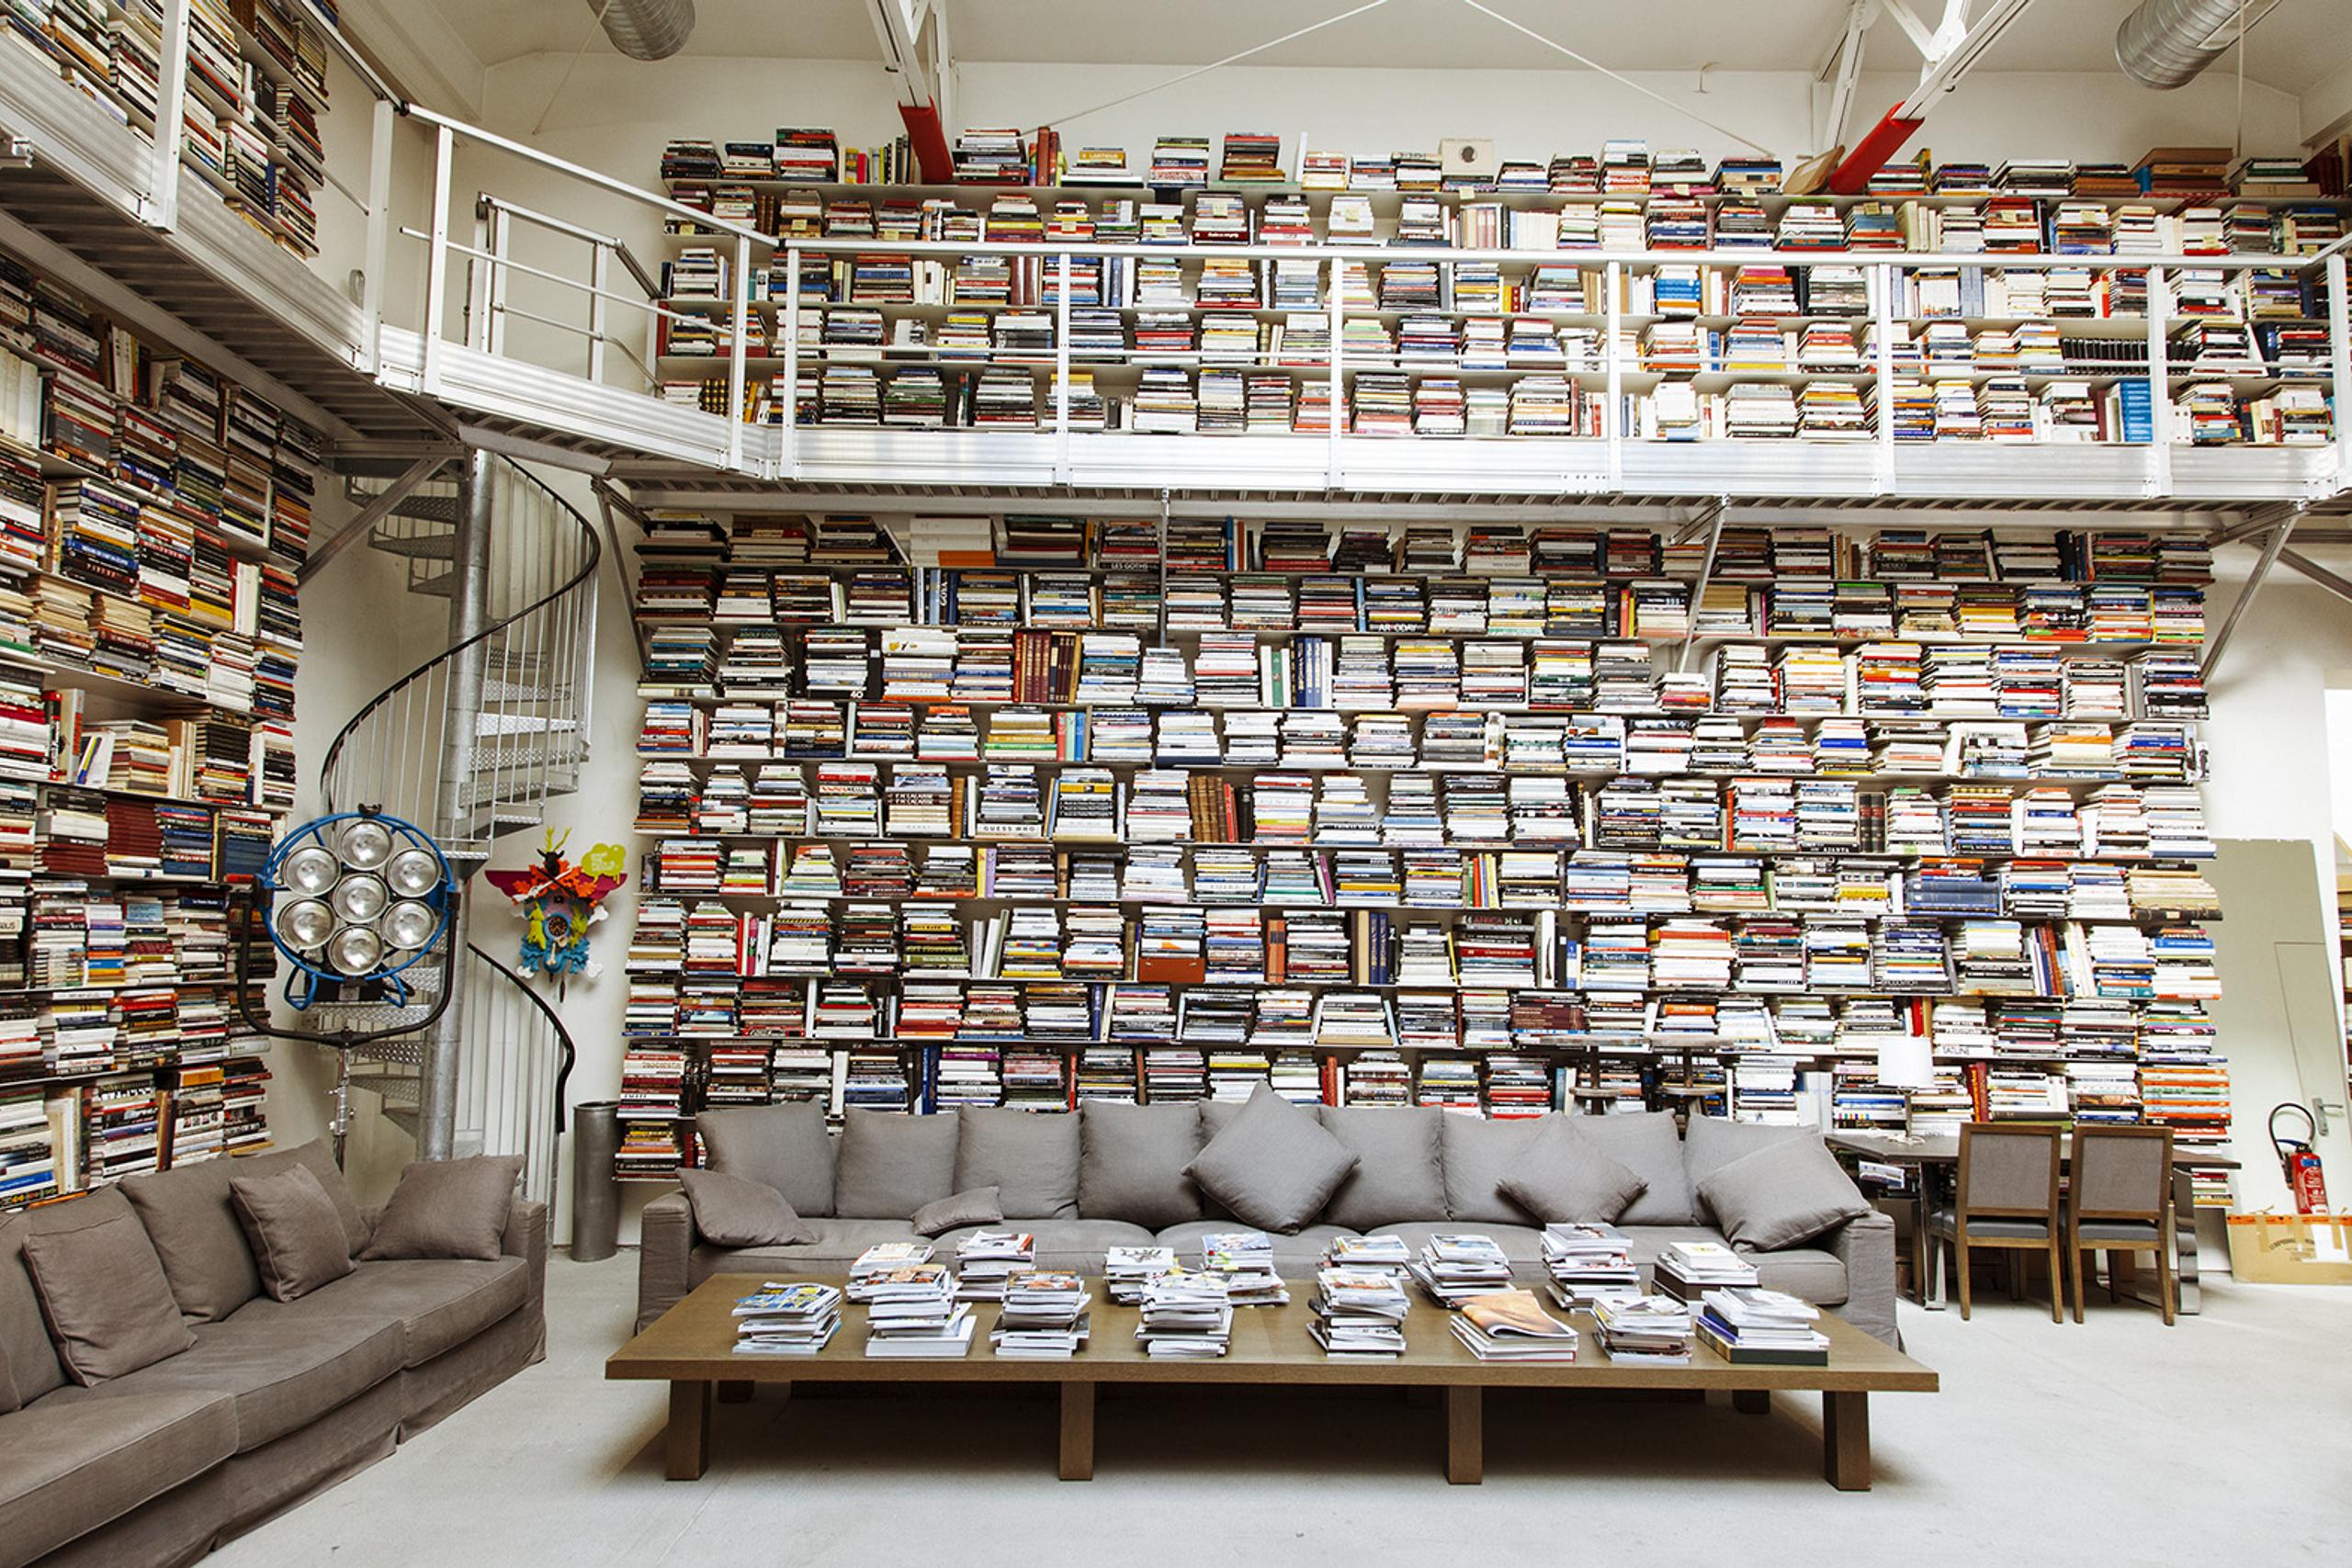 hundreds of books stacked on shelf and on table